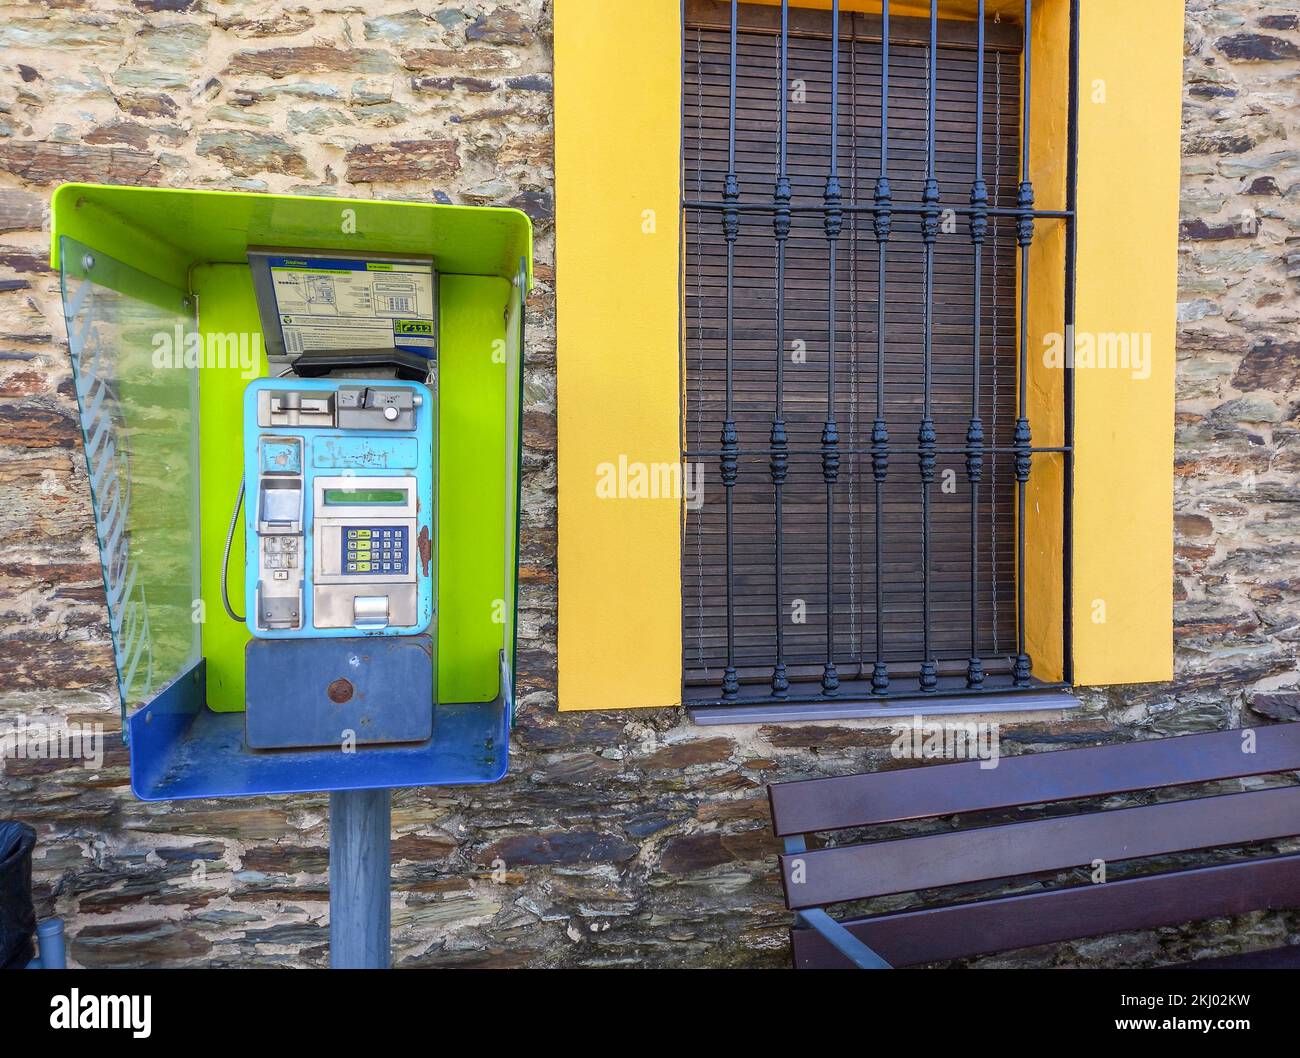 La Codosera, Badajoz - Aug 19th, 2021: Non-enclosed telephone booth installed in rural area. Sidewalk with public bench Stock Photo